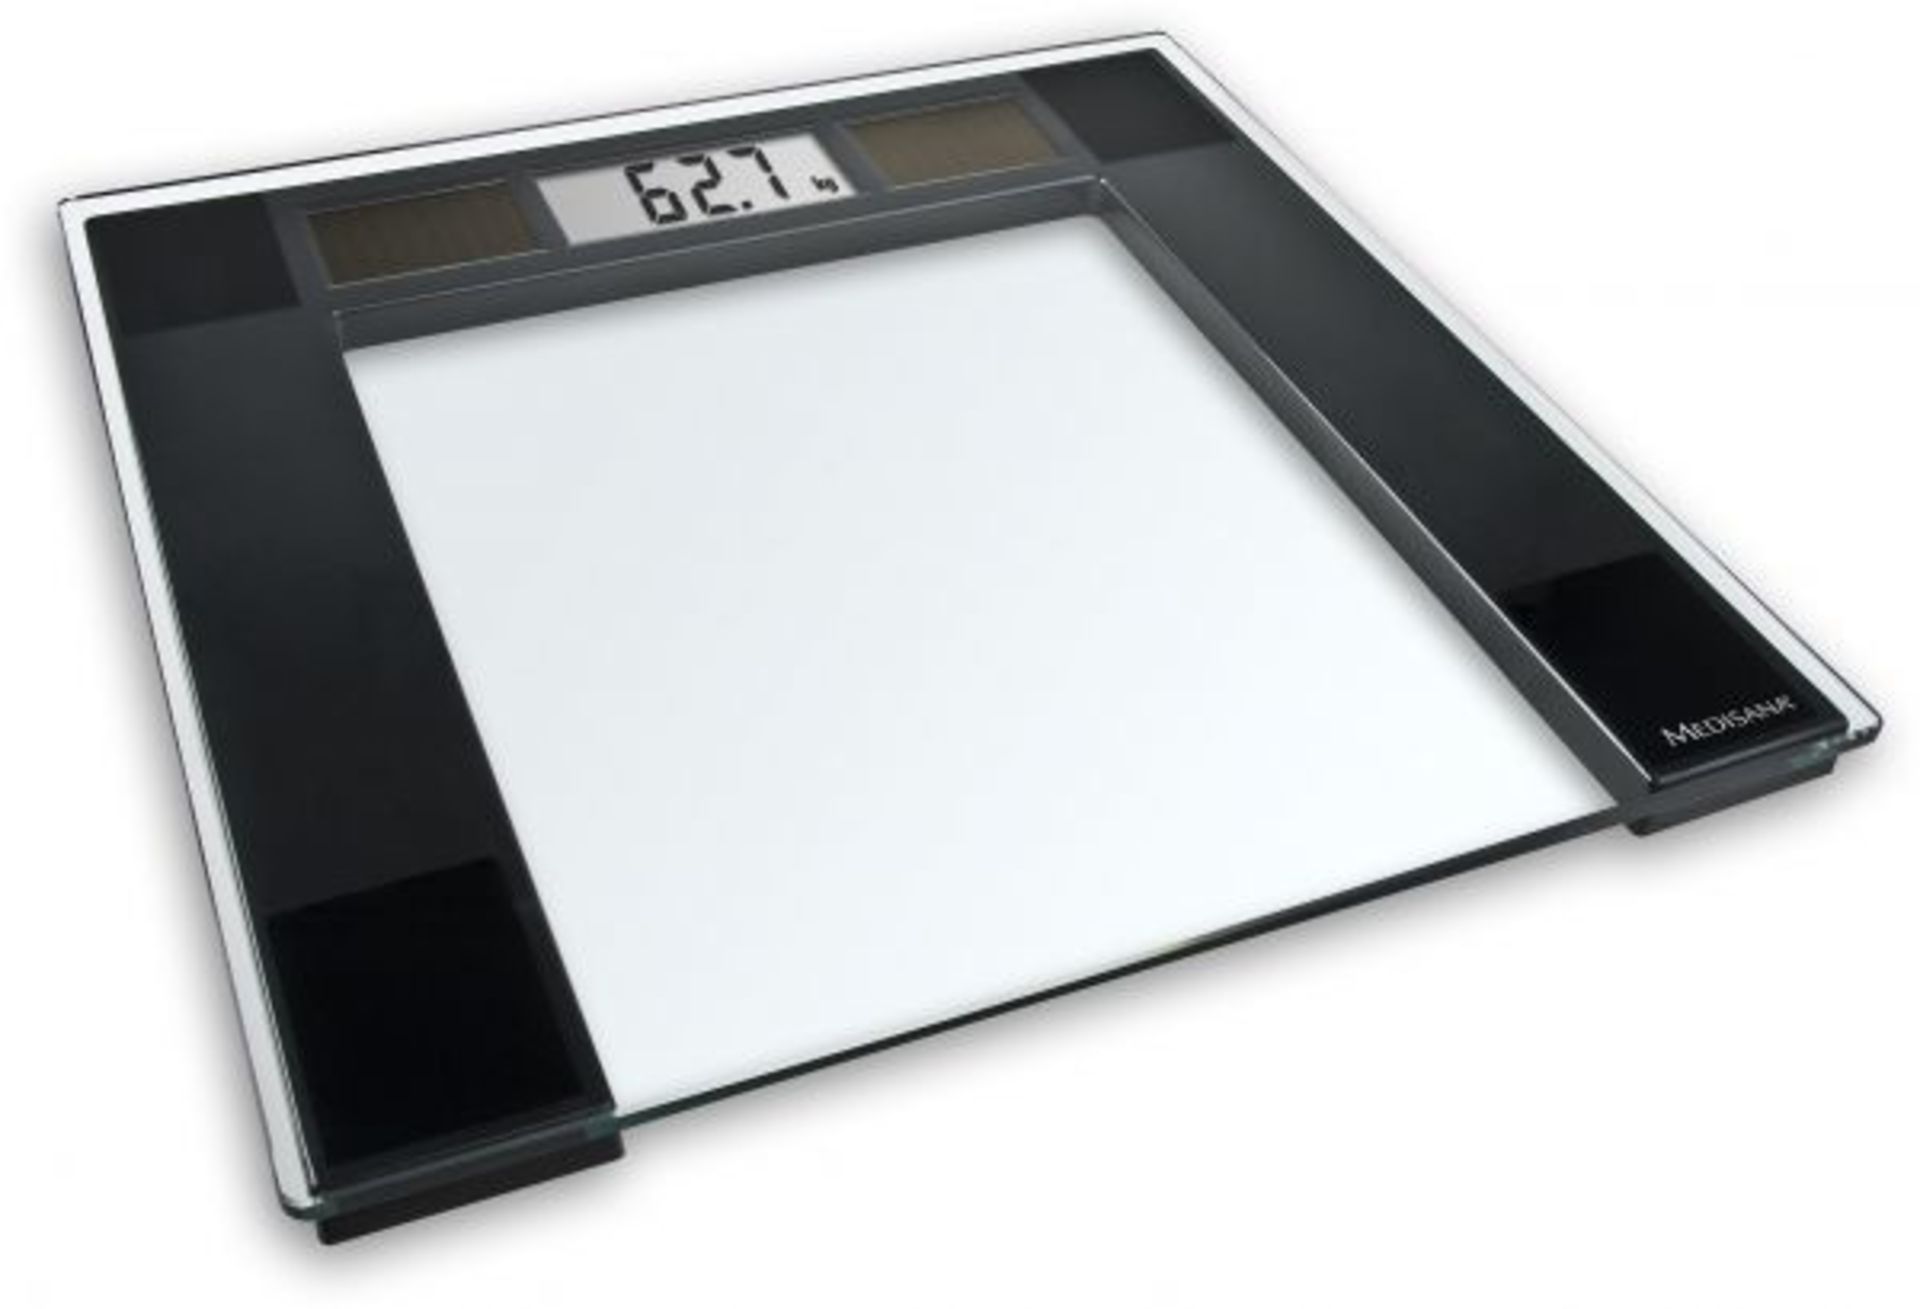 V *TRADE QTY* Brand New Medisana Solar Powered Personal Scales (Max 180kg) Glass Topped SRP29.99 X 8